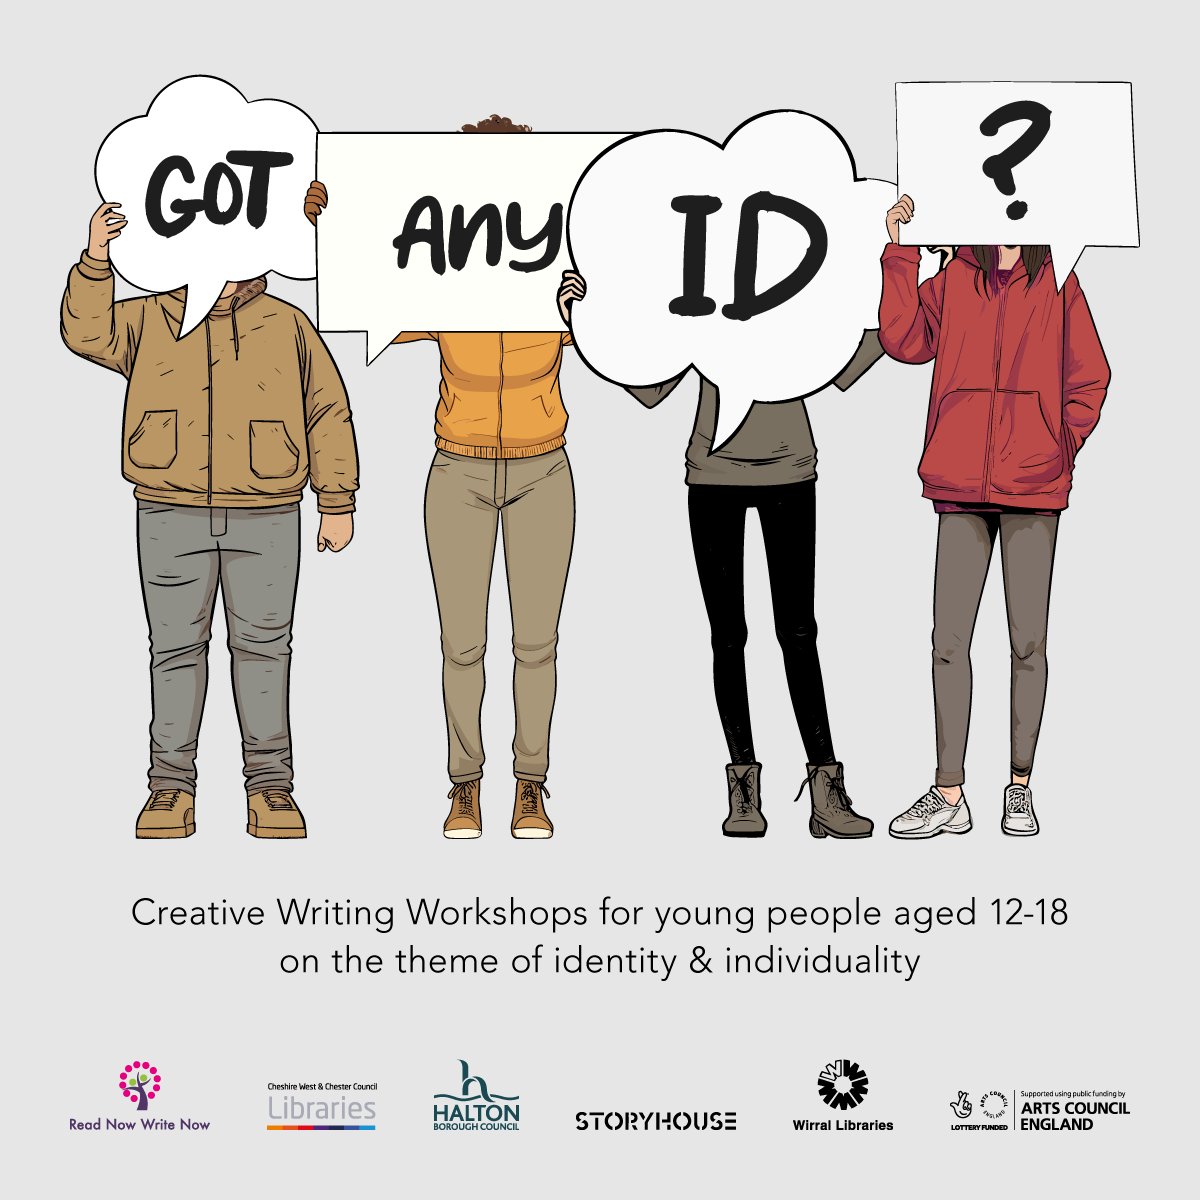 We're showcasing the amazing stories written by young people as part of our Got Any ID? writing project and here is CC's thoughtful story called The Map recorded and uploaded onto YouTube. We hope you enjoy listening to it. youtu.be/9wqHPtdPOM0 #gotanyID?